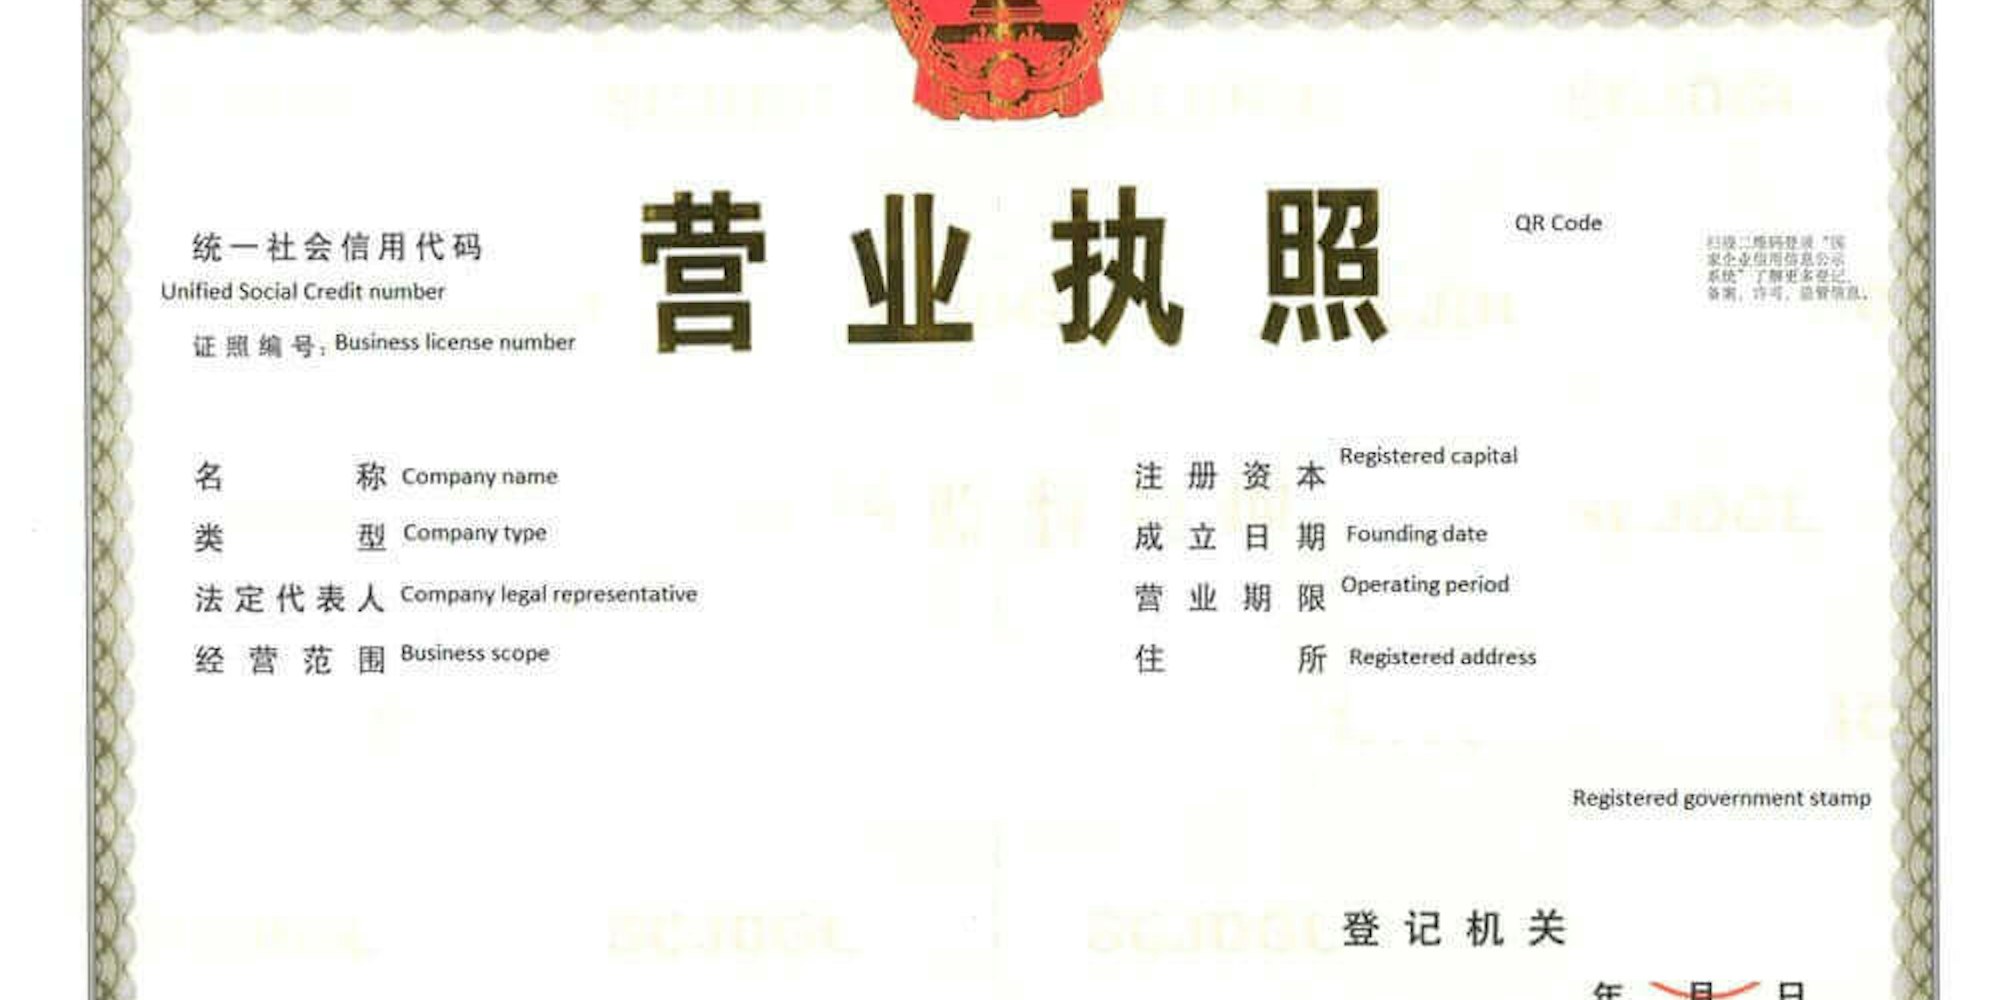 Picture of a Chinese Business License